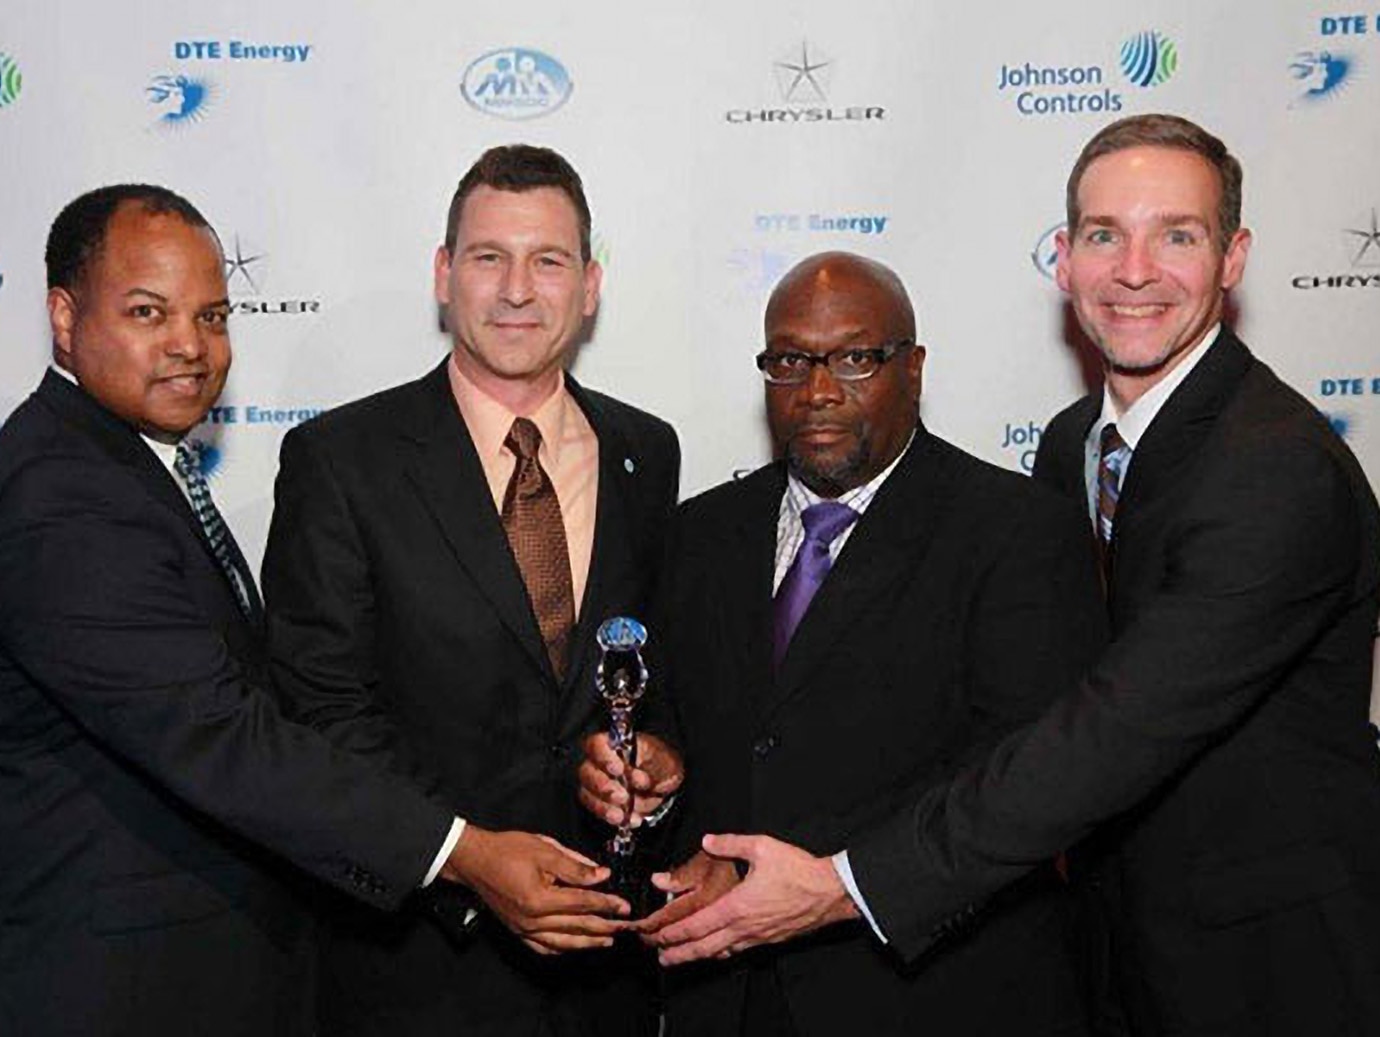 A group of four men holding an award and posing